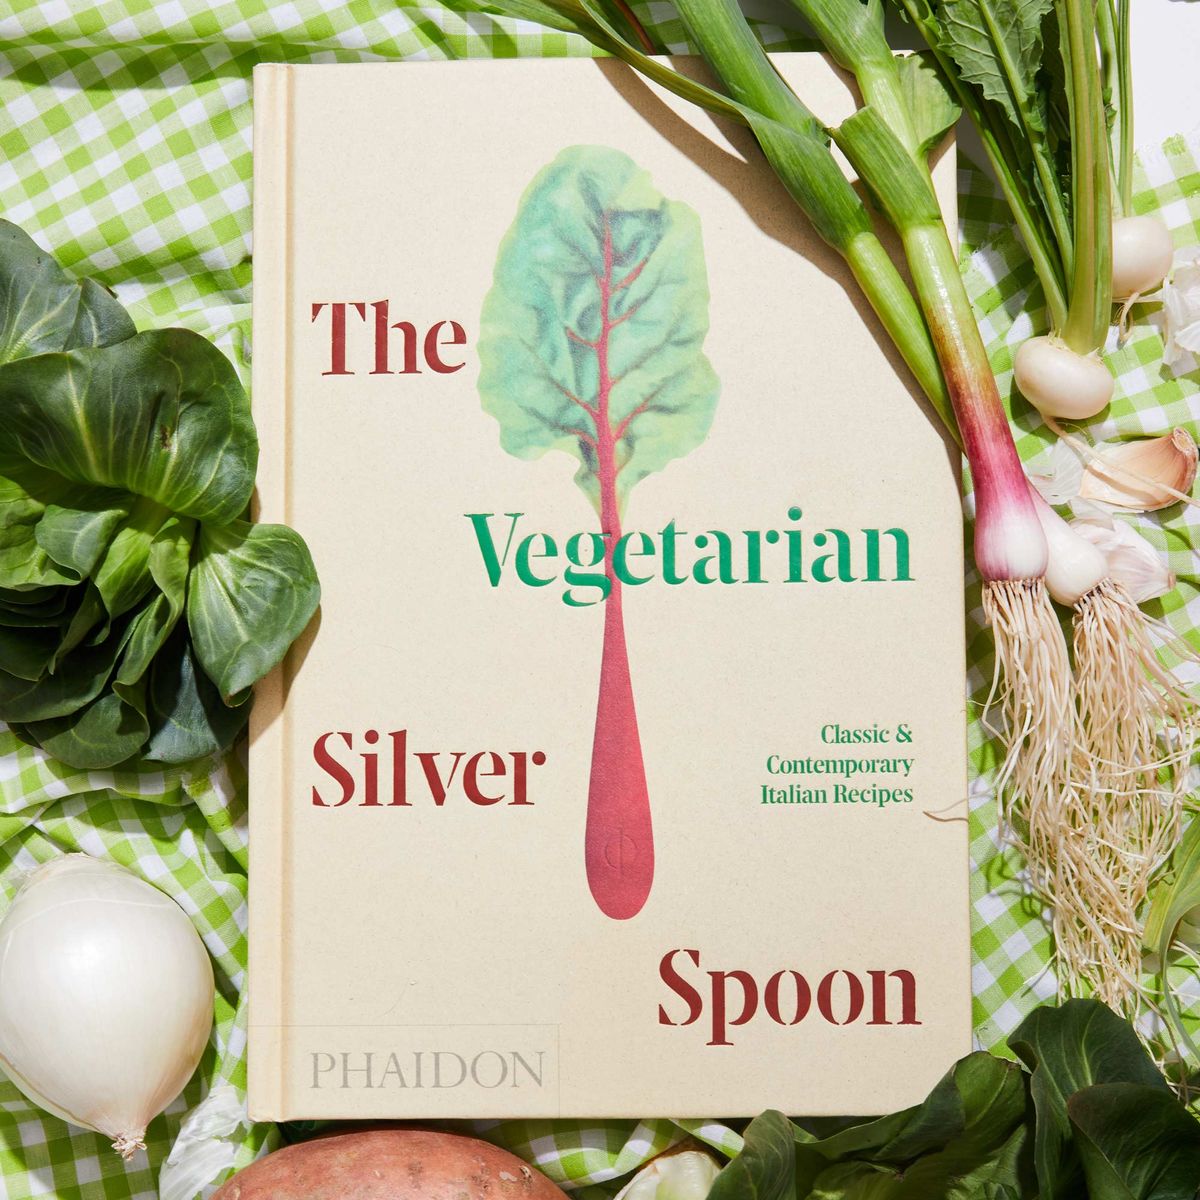 Vegetables are on either side and above and below A hand holds the top of the book The Vegetarian Silver Spoon, which has an illustration of a piece of Swiss chard